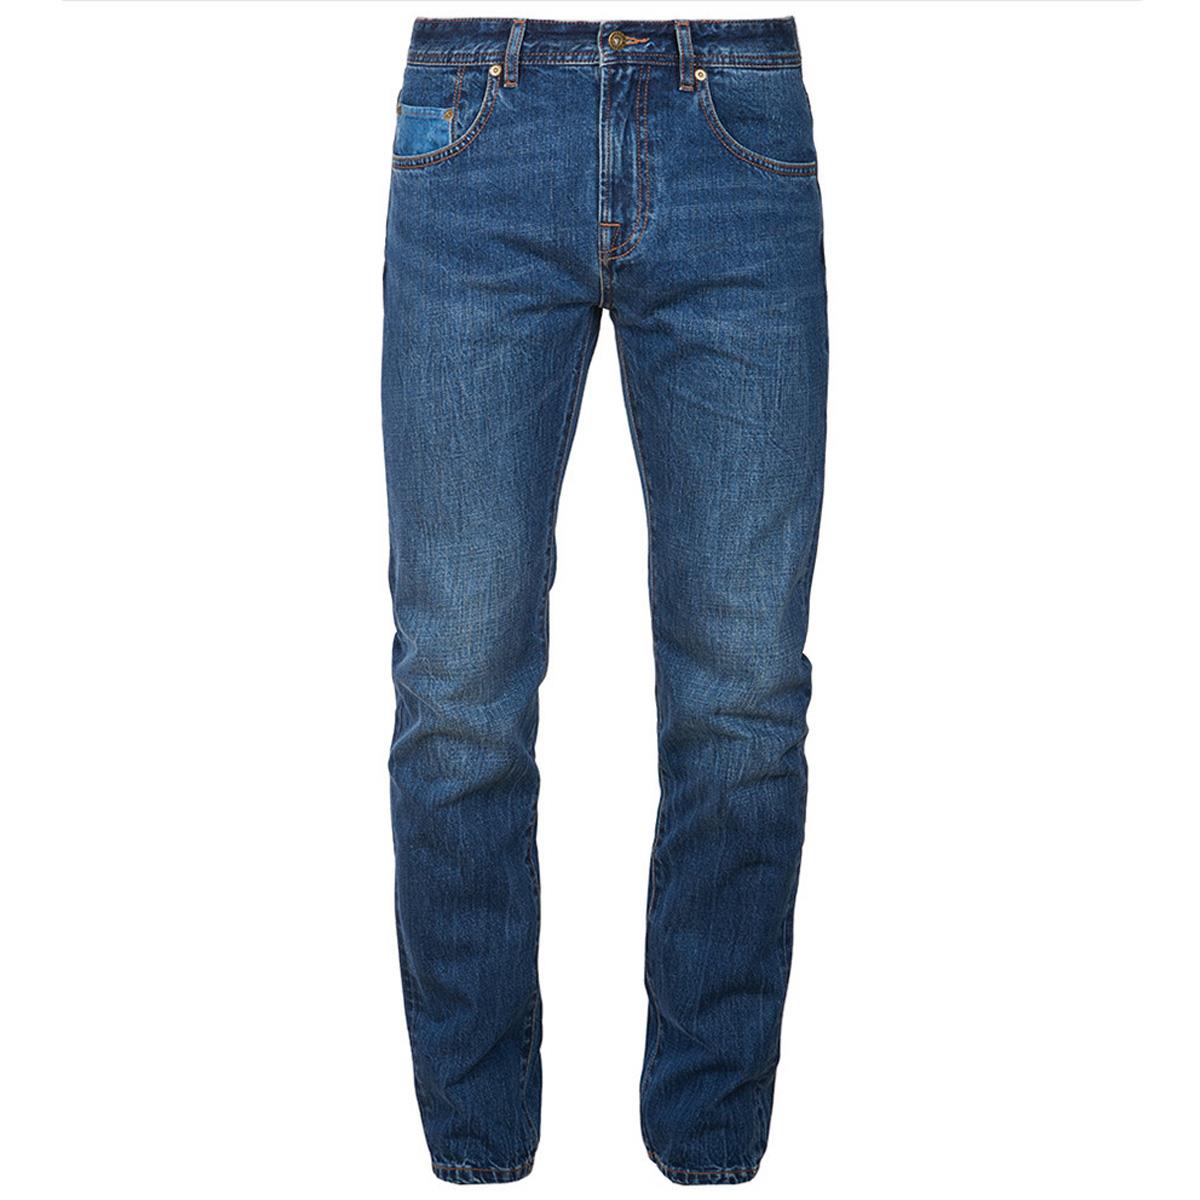 What is the regular fit cut of Barbour mens jeans known for?